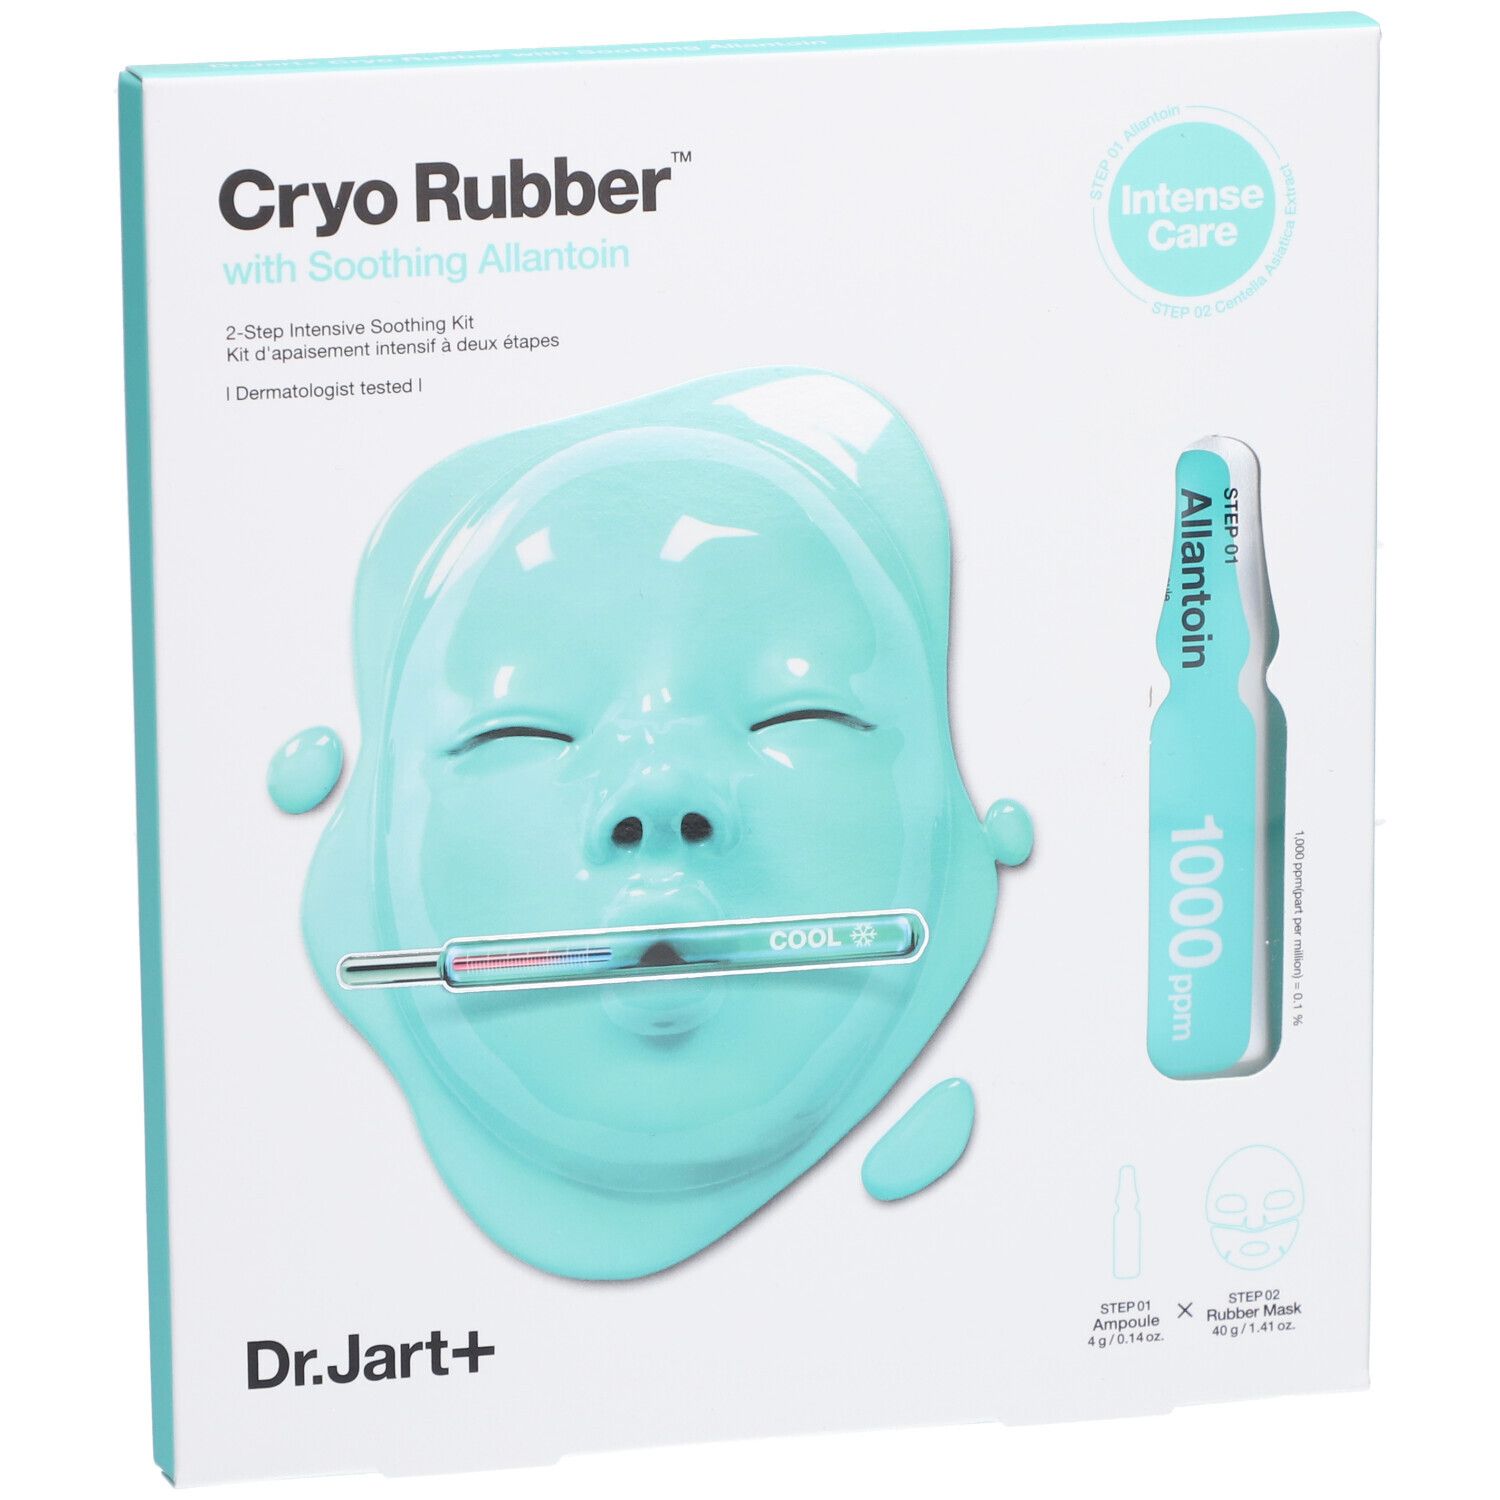 Dr.Jart Cryo Rubber with Soothing Allantoin